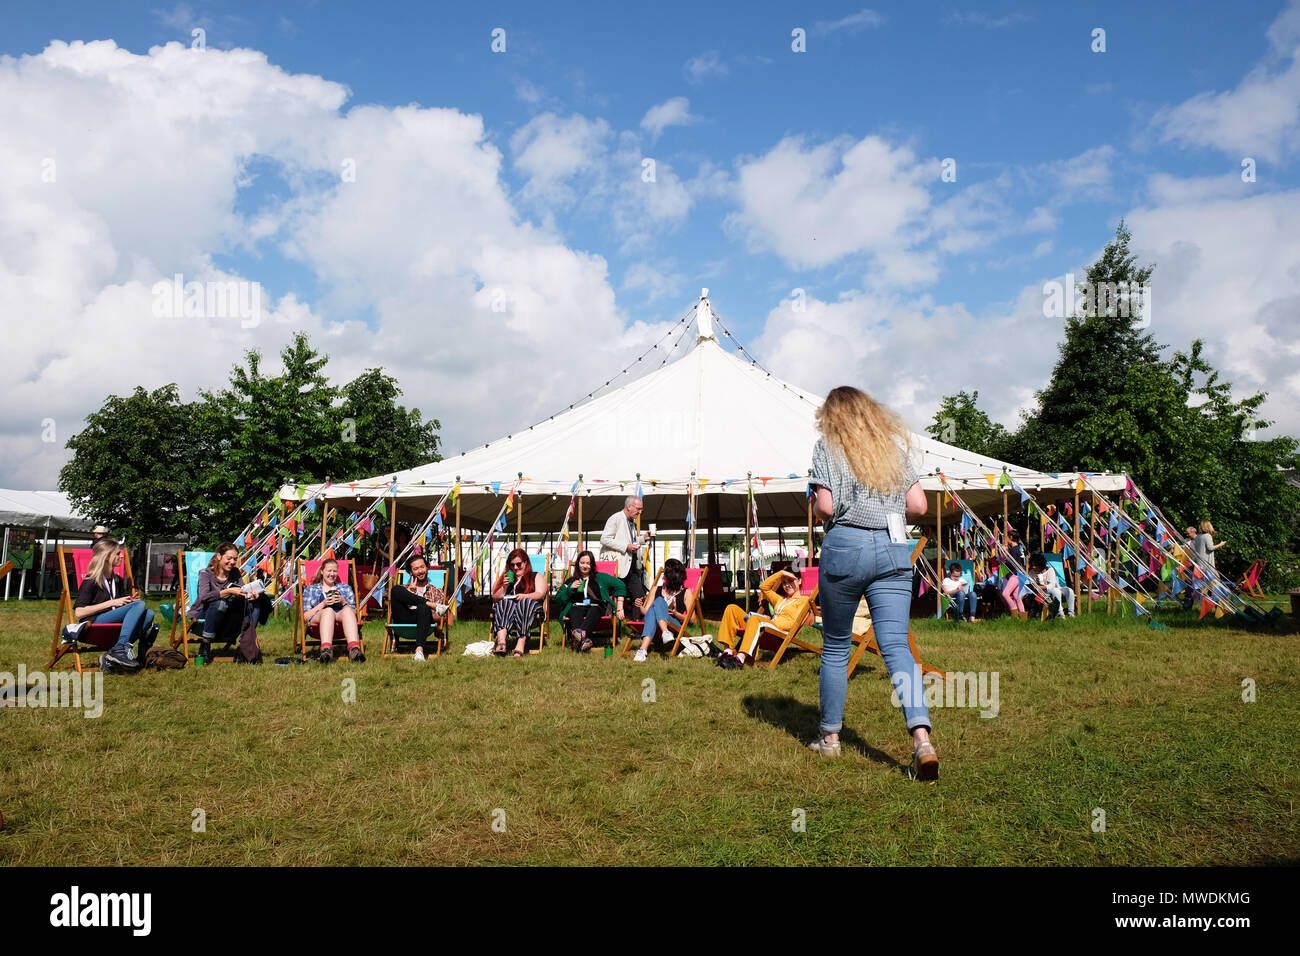 Hay Festival, Hay on Wye, UK - Friday 1st June 2018 -  The sun shines onto the Hay Festival lawns this morning on the first day of the meteorological summer - Photo Steven May / Alamy Live News Stock Photo